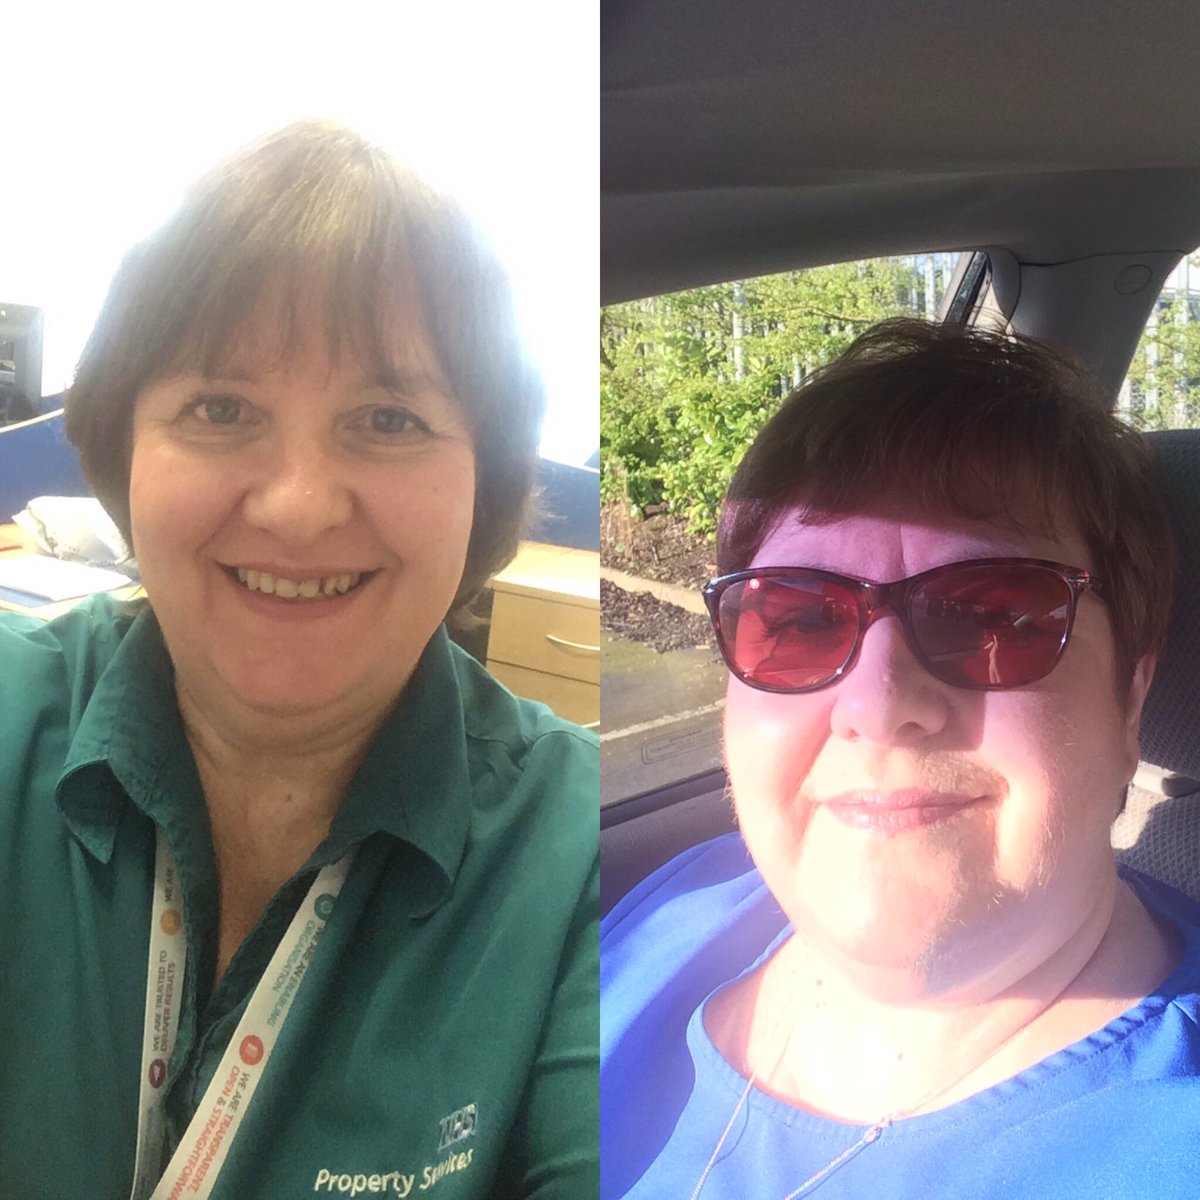 So happy feel amazing What real food can do for you my before/after pics SW: July 2018 = 280lbs CW = 210lbs #realfoodrocks I Support #RealFoodDay @LowCarbProgram @ProfTimNoakes @John1827Joyce @DietDoctor1